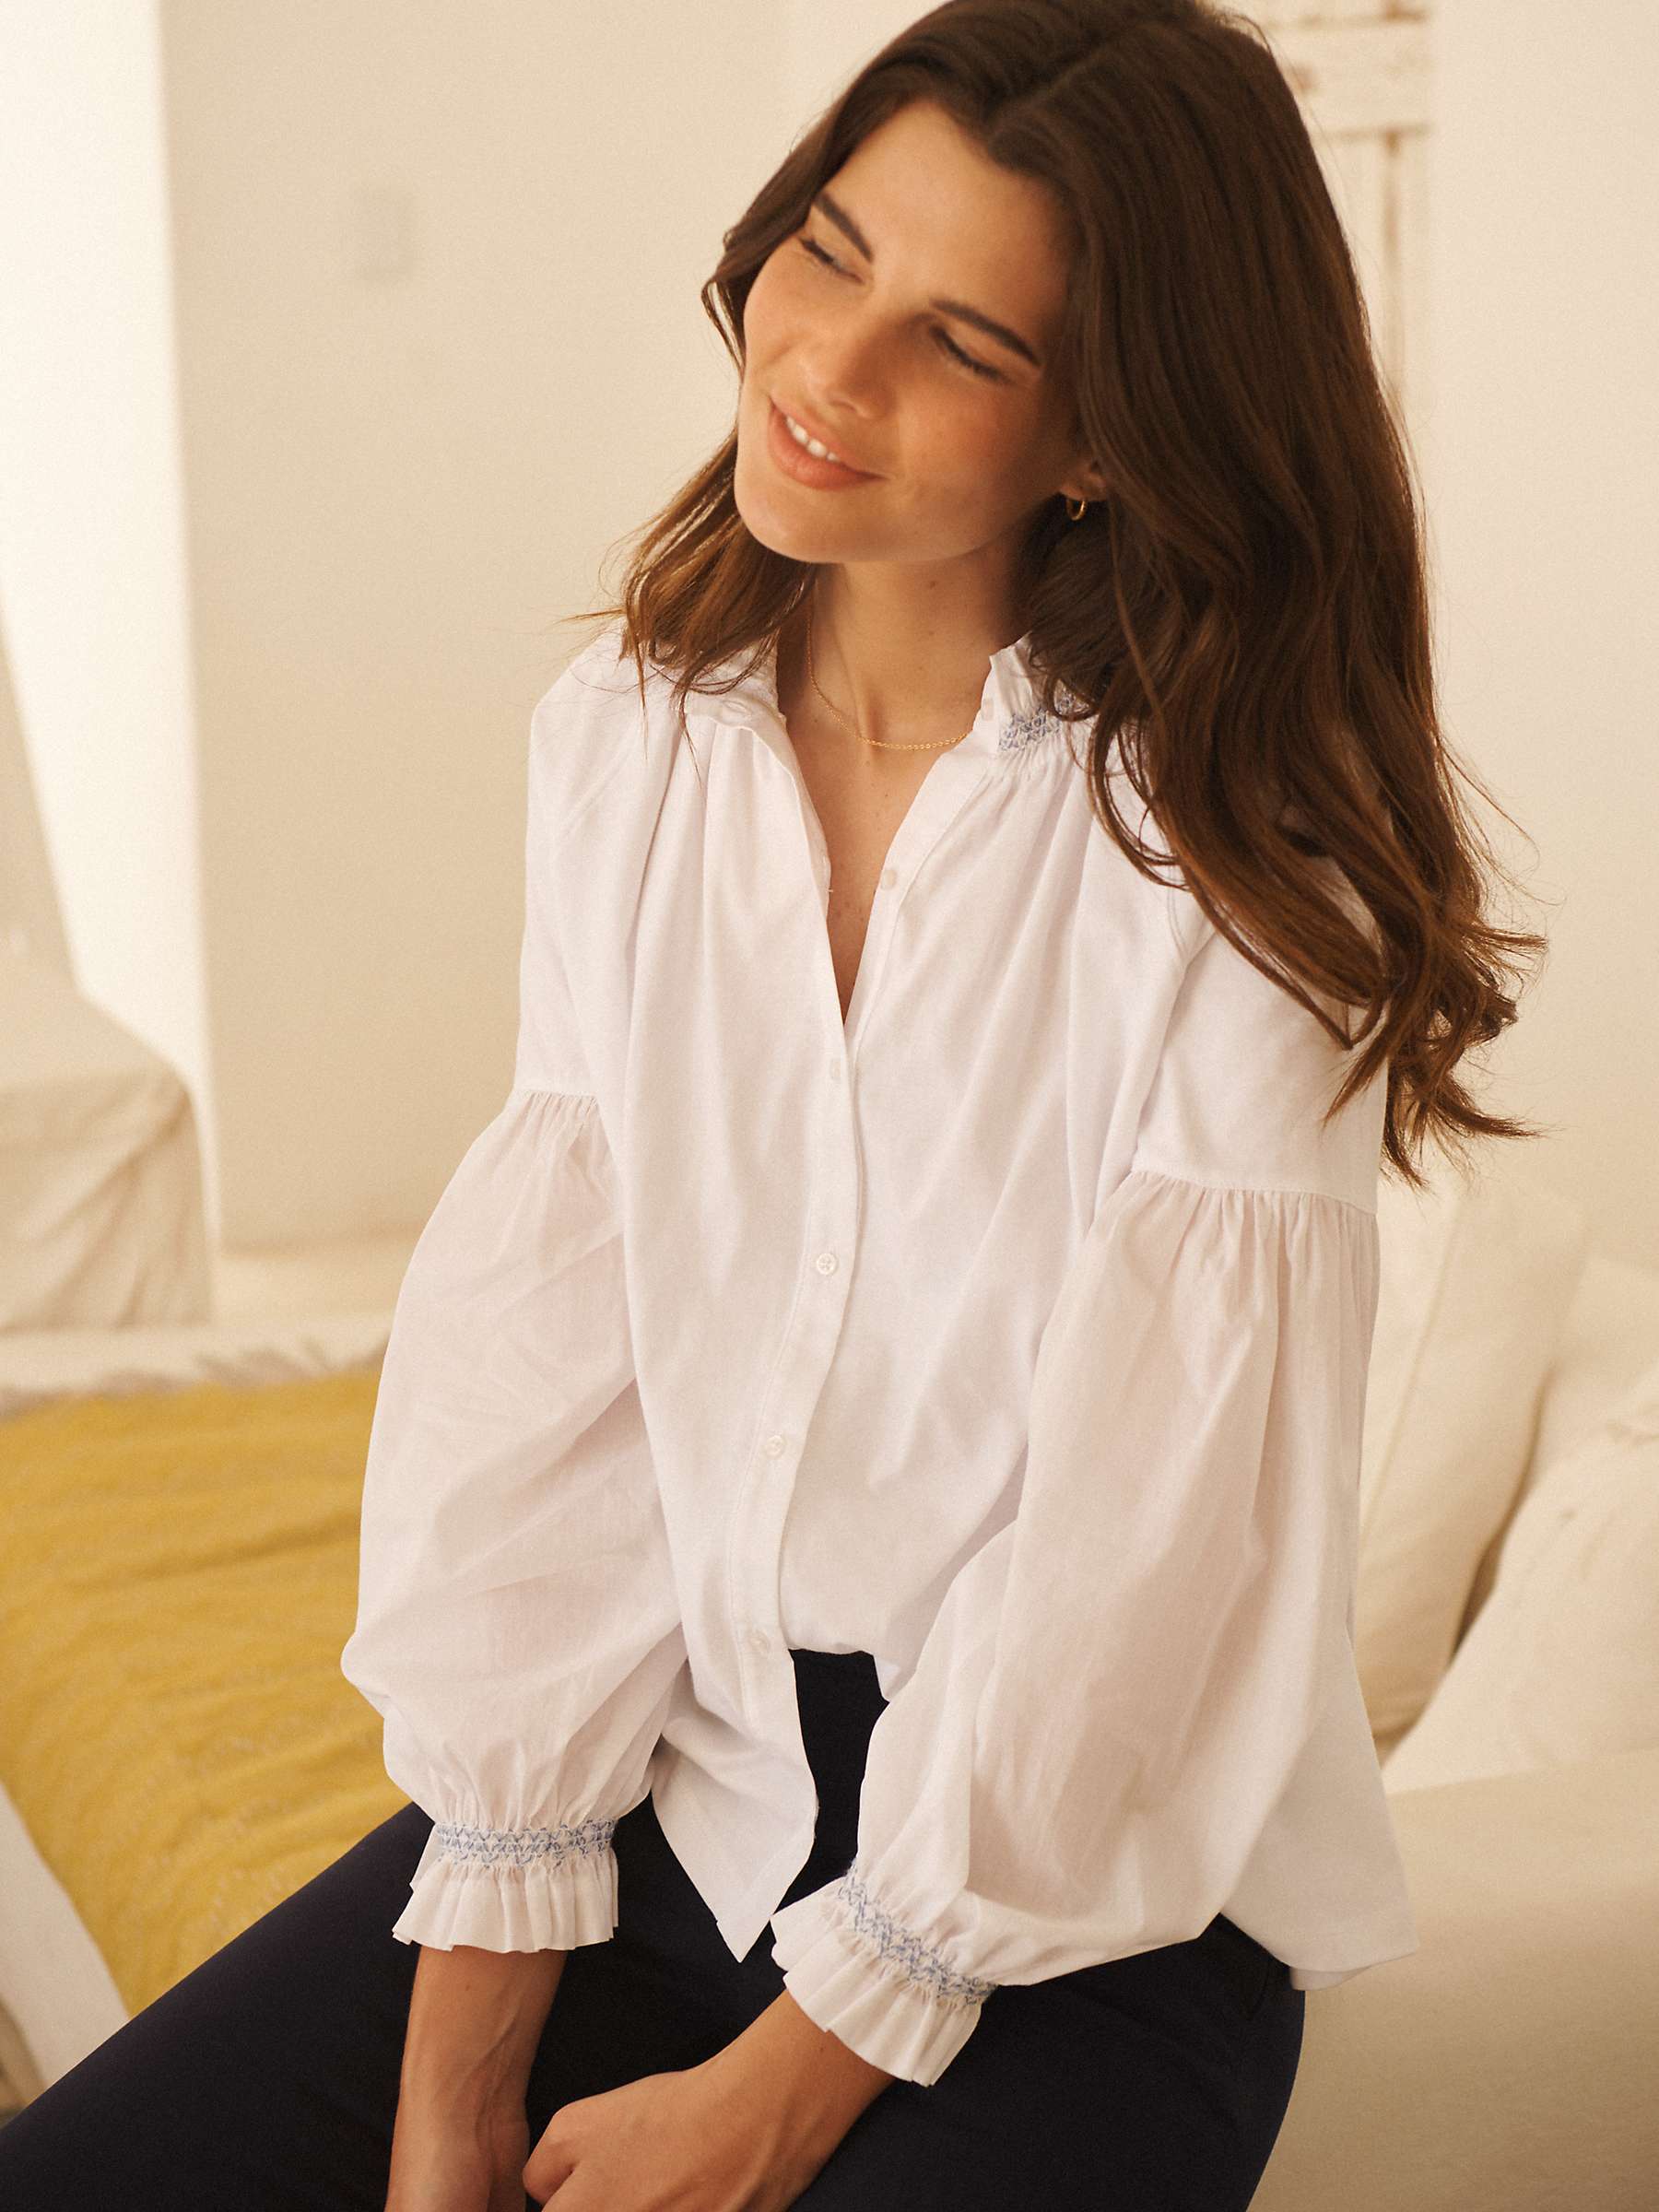 Buy NRBY Esther Embroidered Cotton Shirt, White Online at johnlewis.com